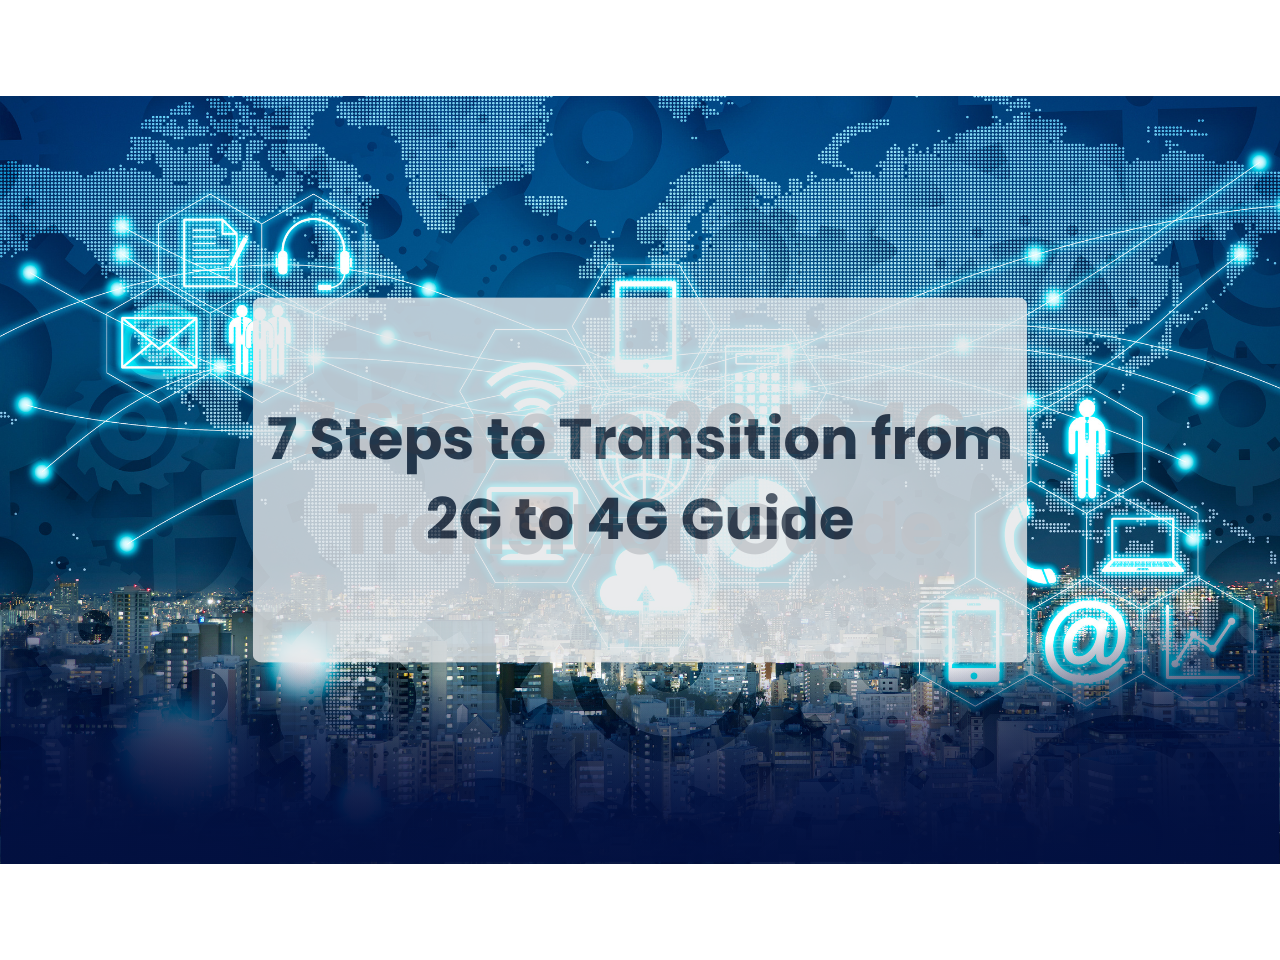 7 Steps to Transition from 2G to 4G Guide;